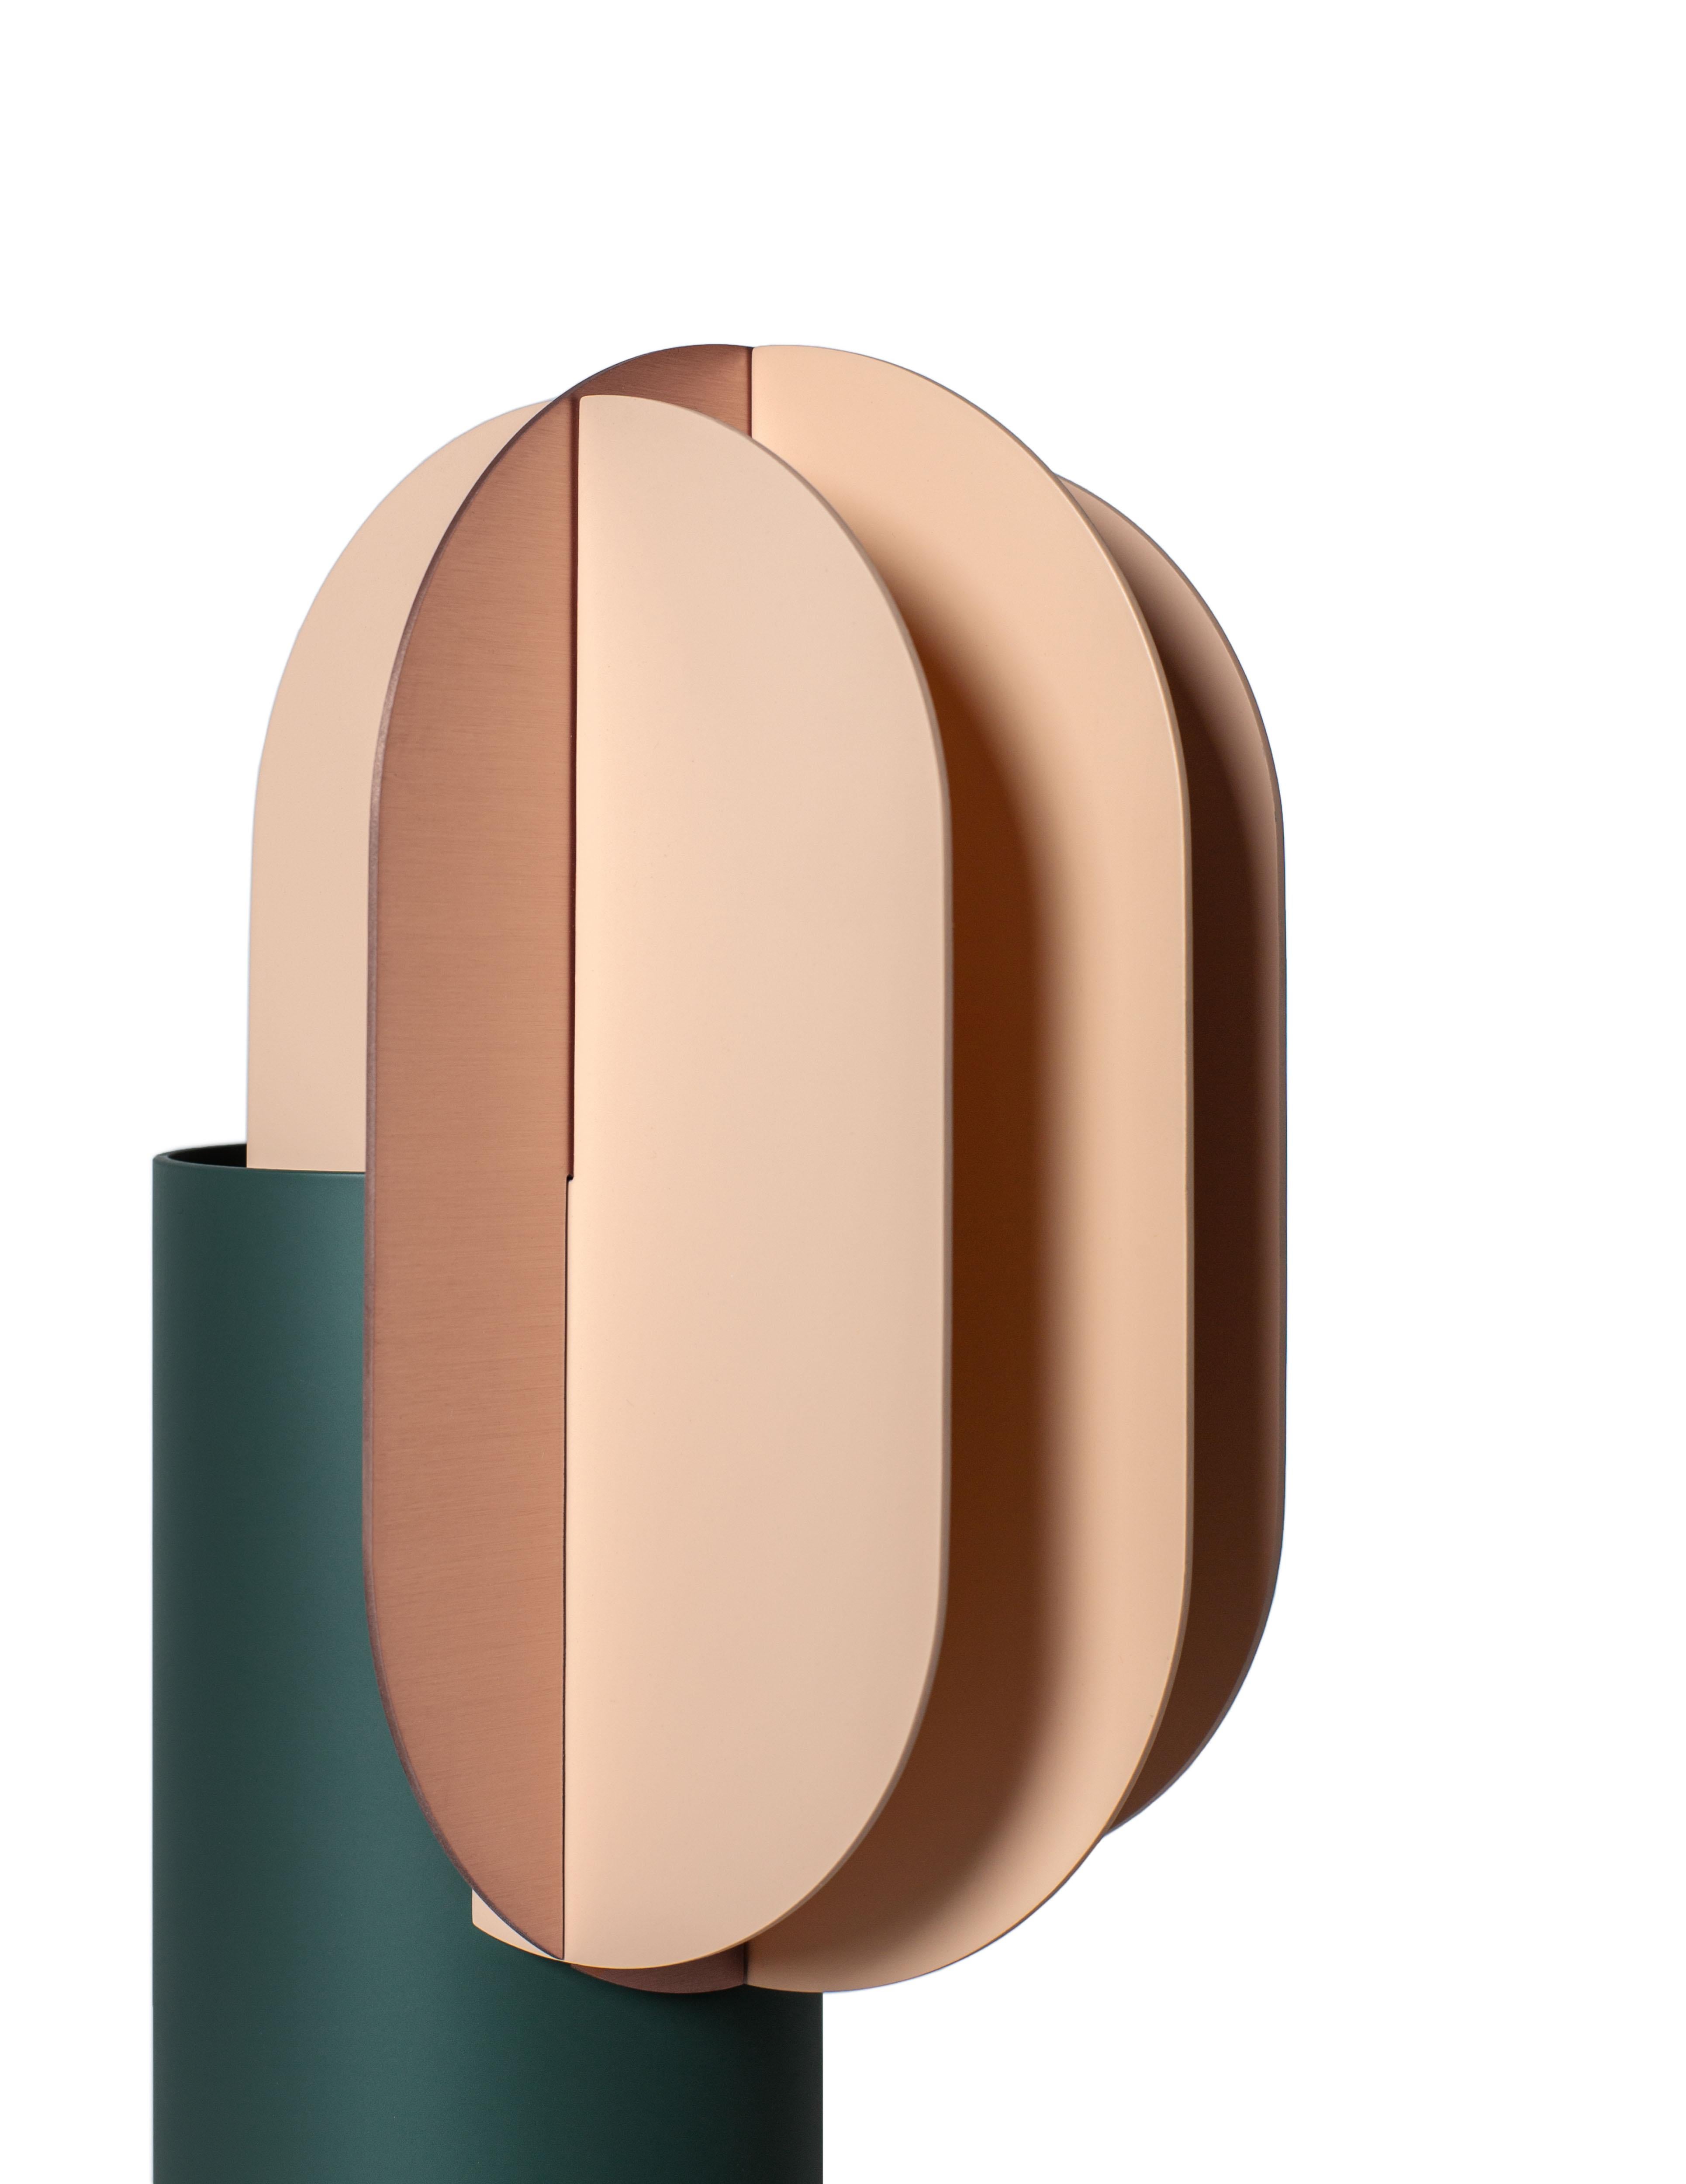 Painted Set of Two Modern Vase Delaunay & Gabo CS10 by Noom in Copper and Steel